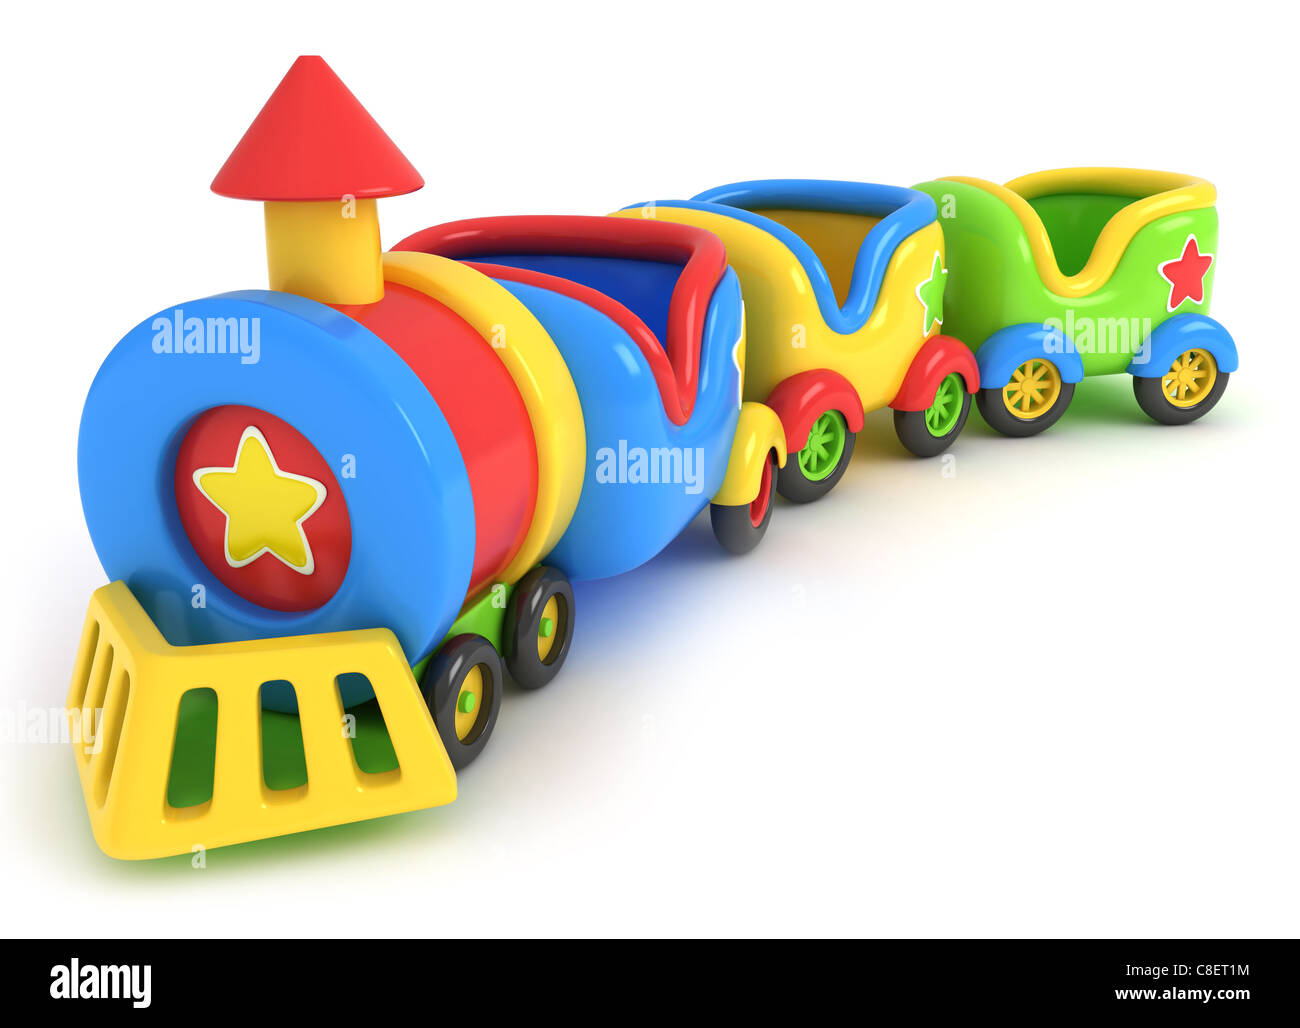 3D Illustration of a Toy Train Stock Photo - Alamy